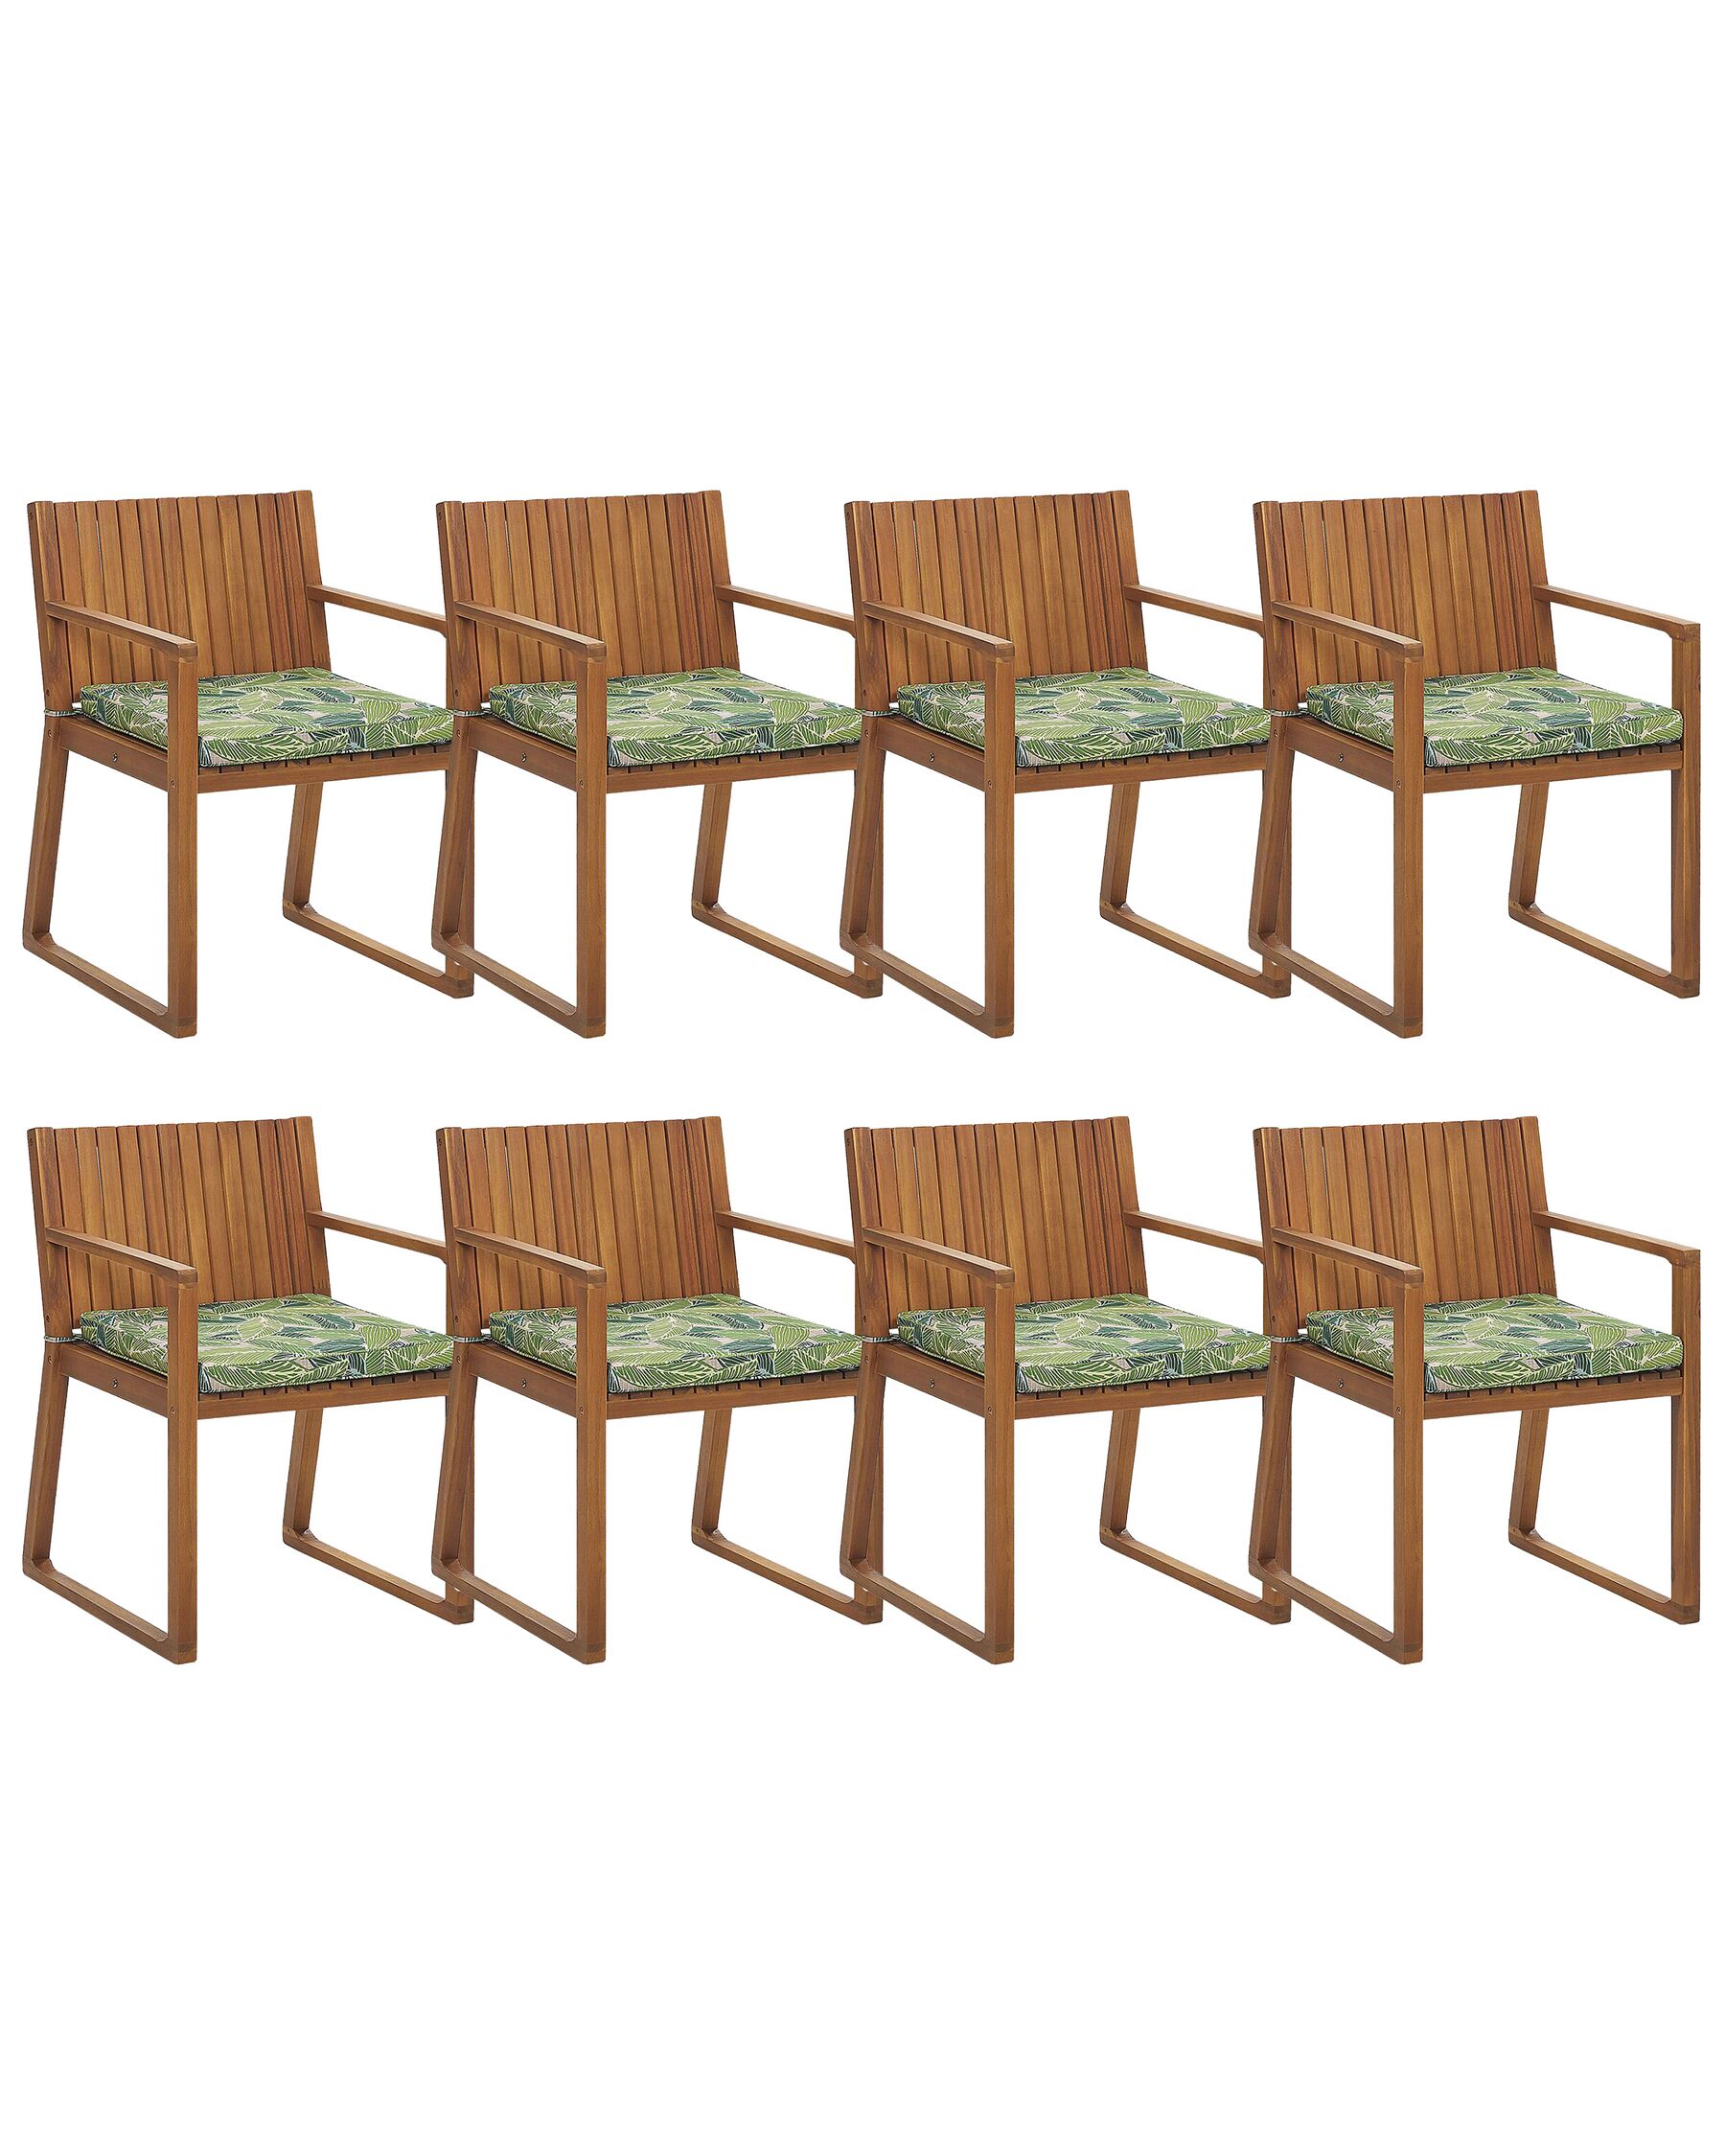 Set of 8 Acacia Wood Garden Dining Chairs with Leaf Pattern Green Cushions SASSARI_774905